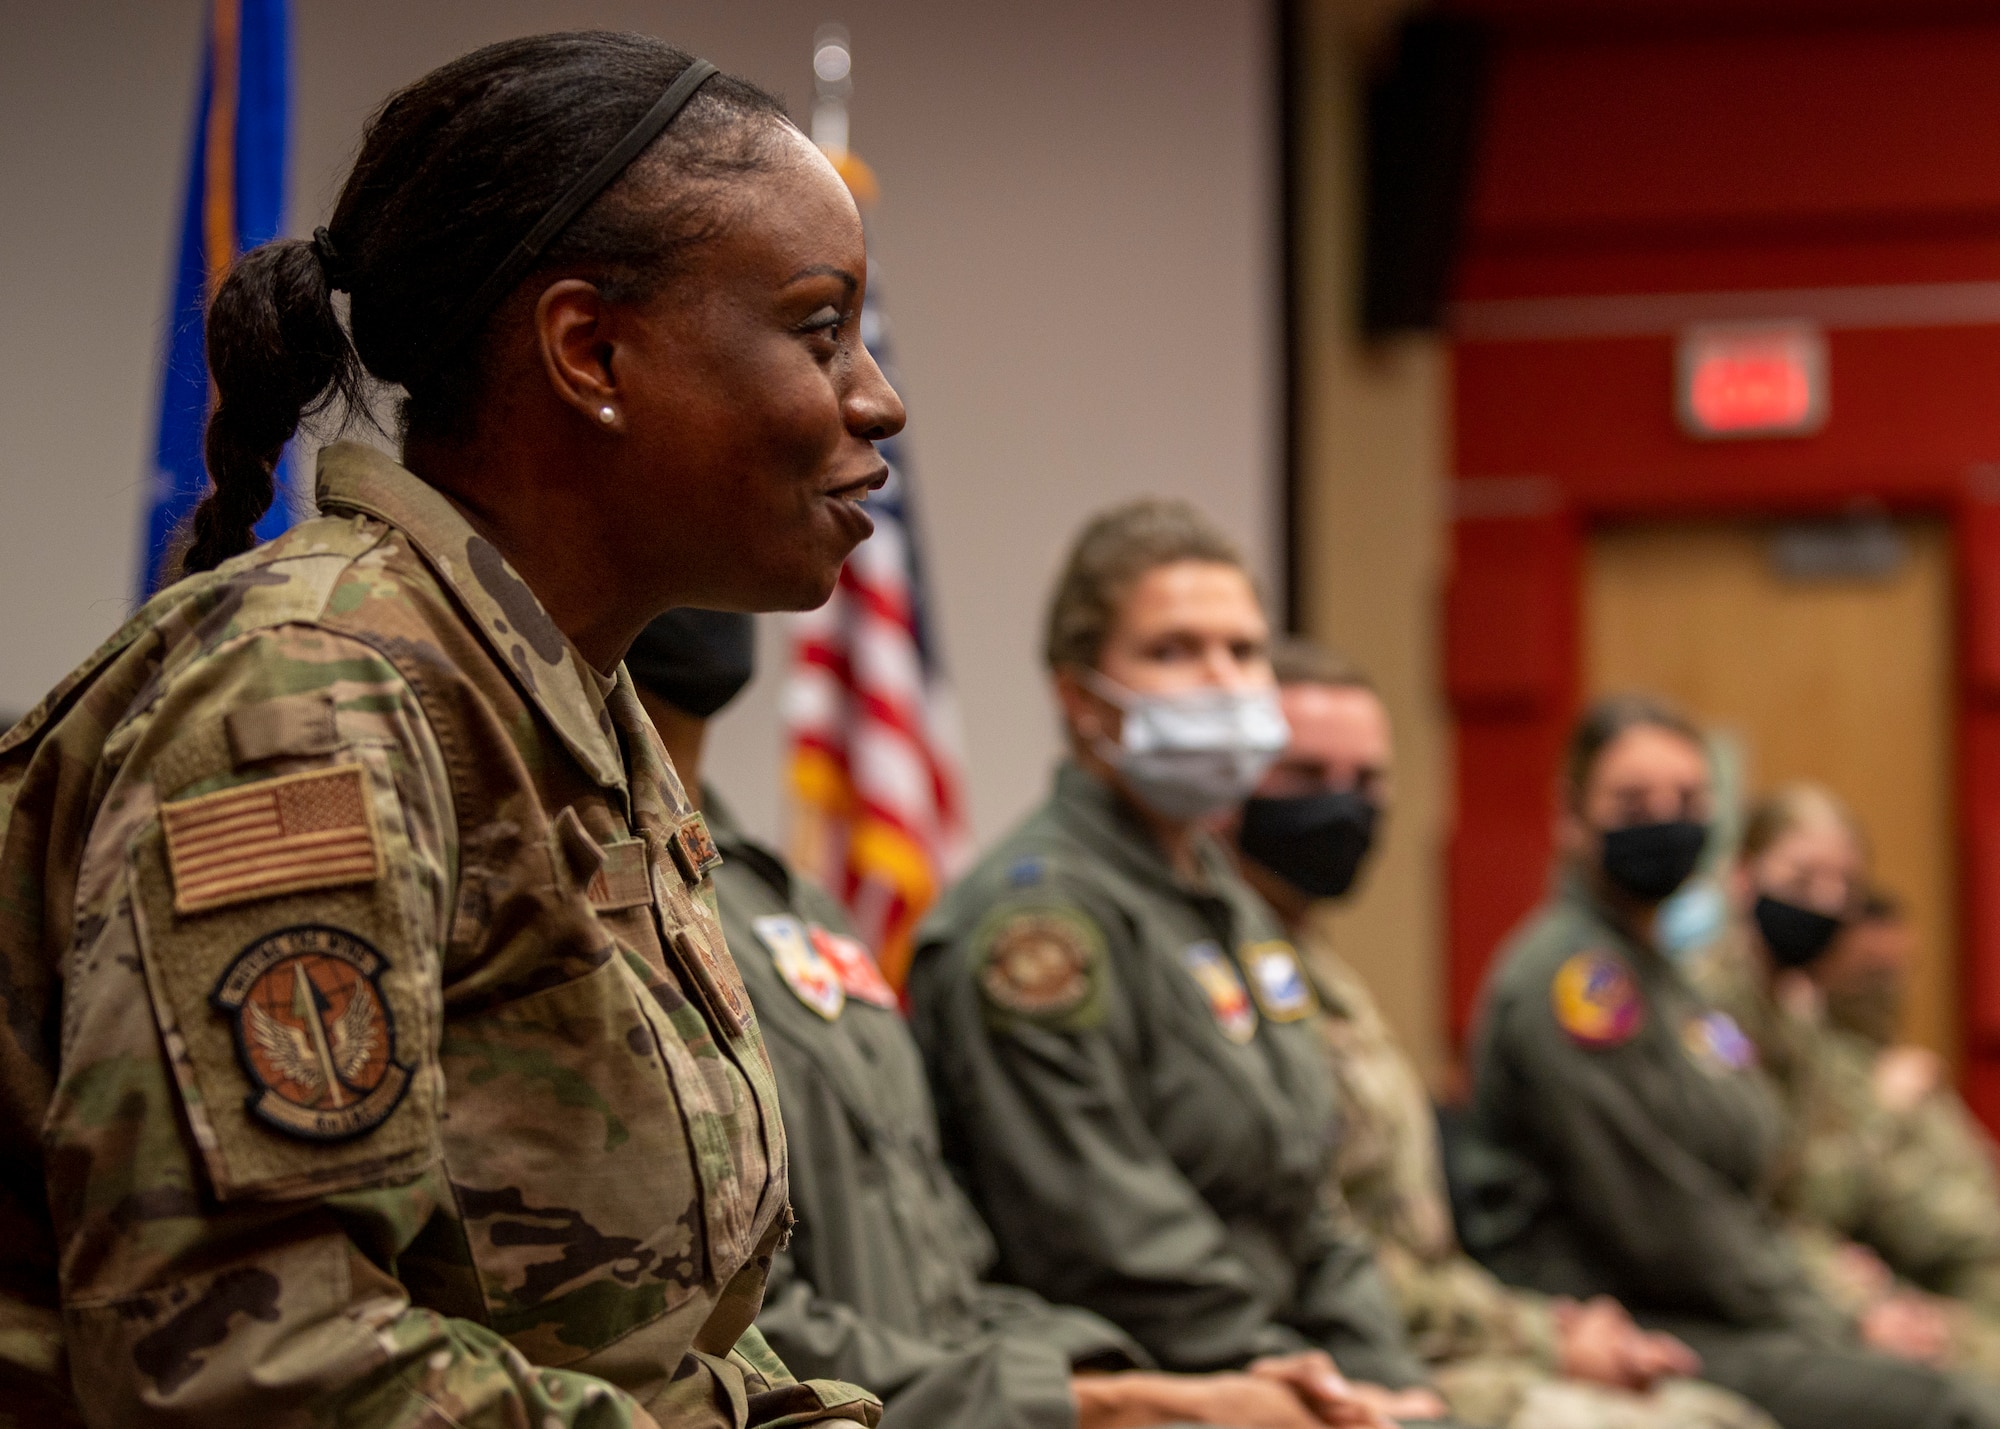 Chief Master Sgt. Chaunda Wharton, 4th Logistics Readiness Squadron senior enlisted leader, speaks with ROTC cadets at North Carolina Agricultural and Technical State University in Greensboro, North Carolina, Oct. 28, 2021.